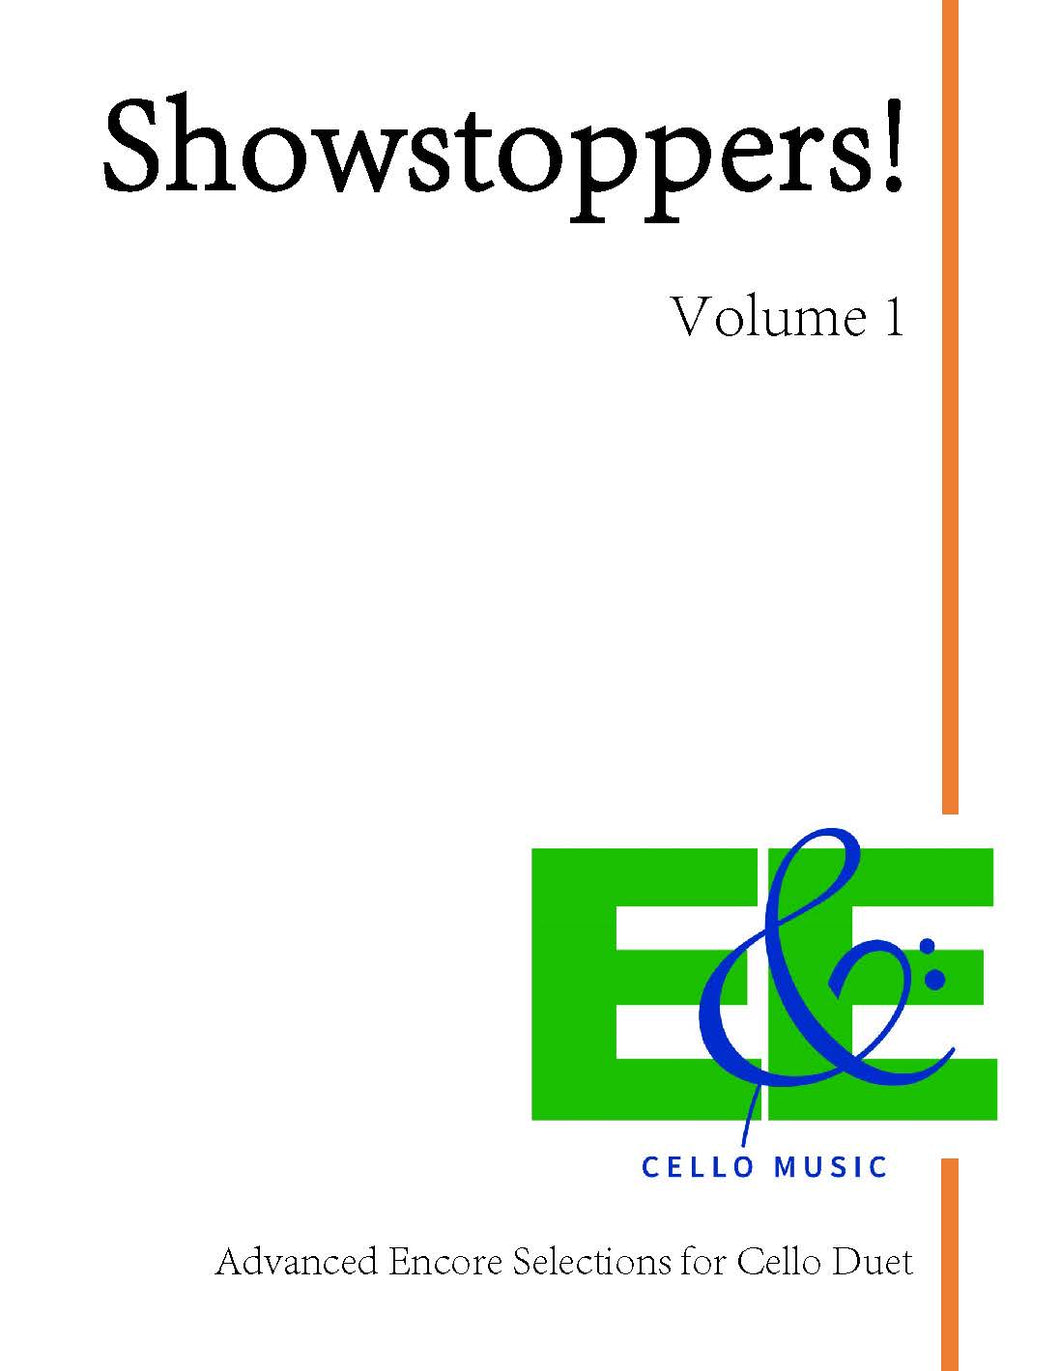 Showstoppers! Vol. 1<br>Advanced Encore Selections<br>for Cello Duet<br>*Digital Download